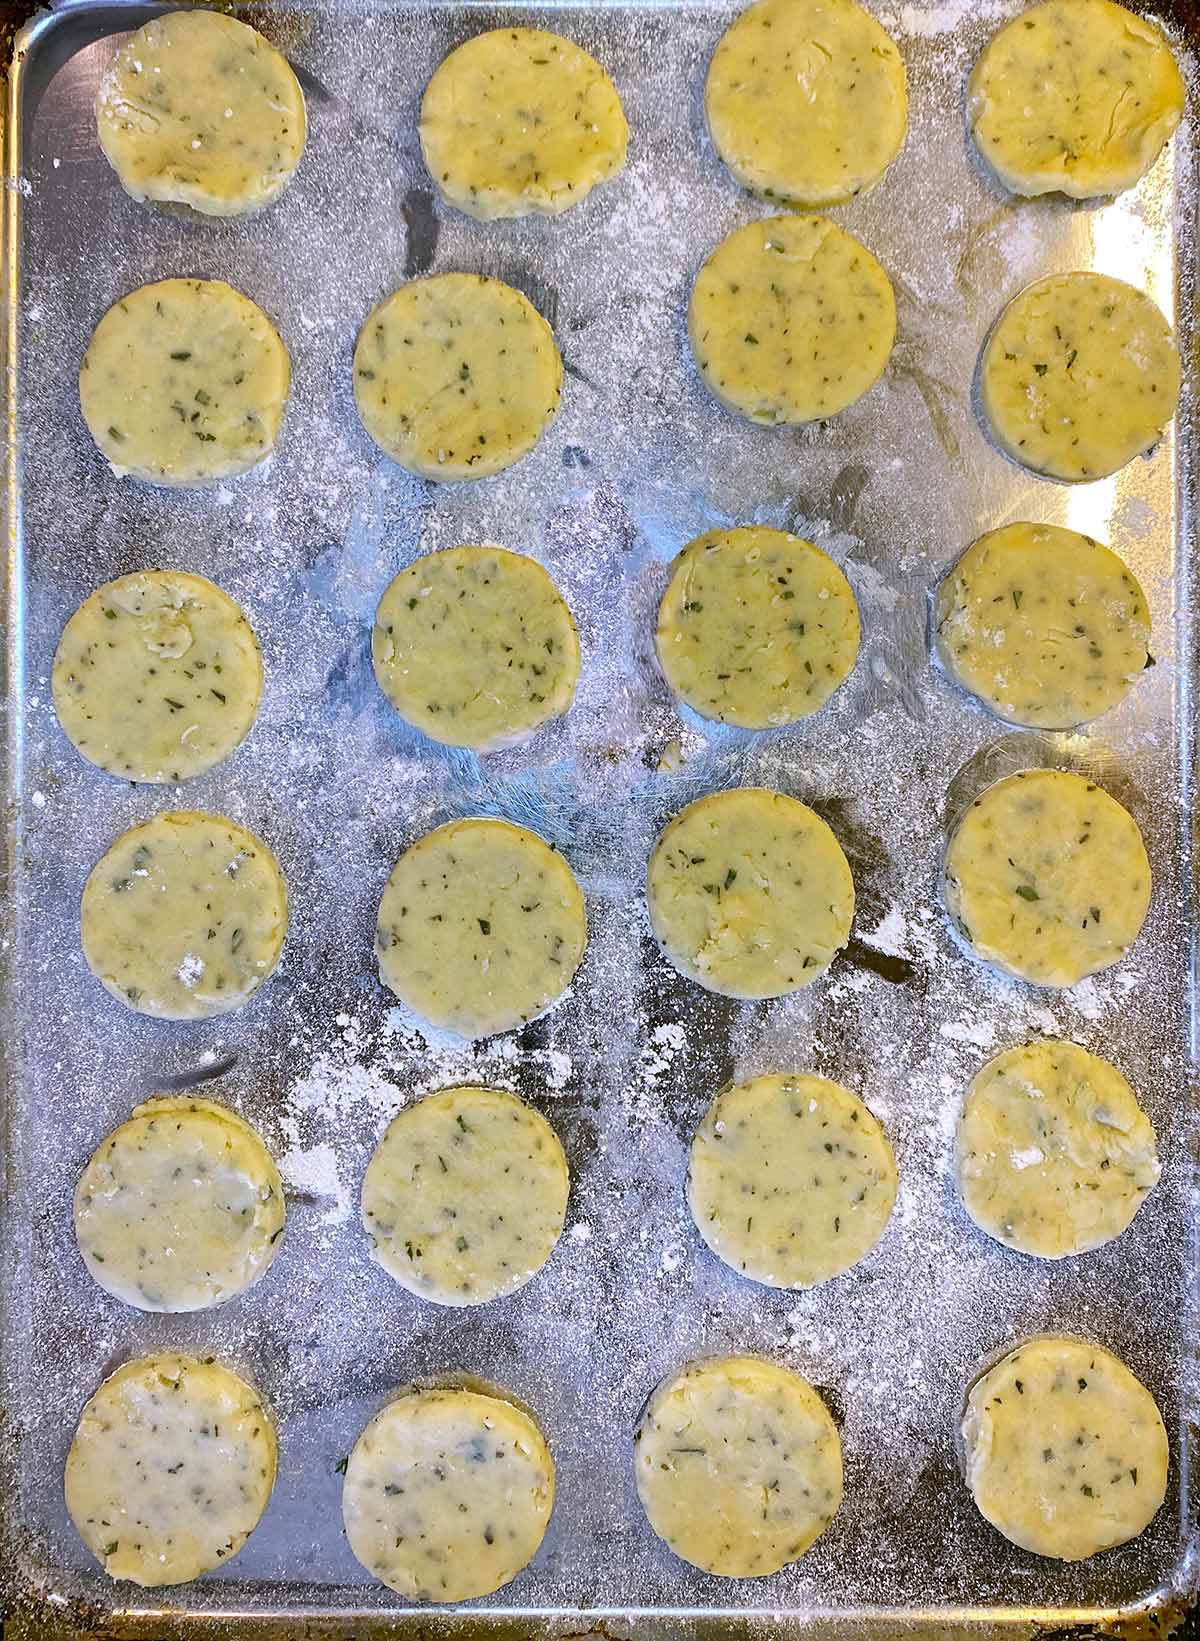 Twenty four uncooked biscuits on a floured baking tray.